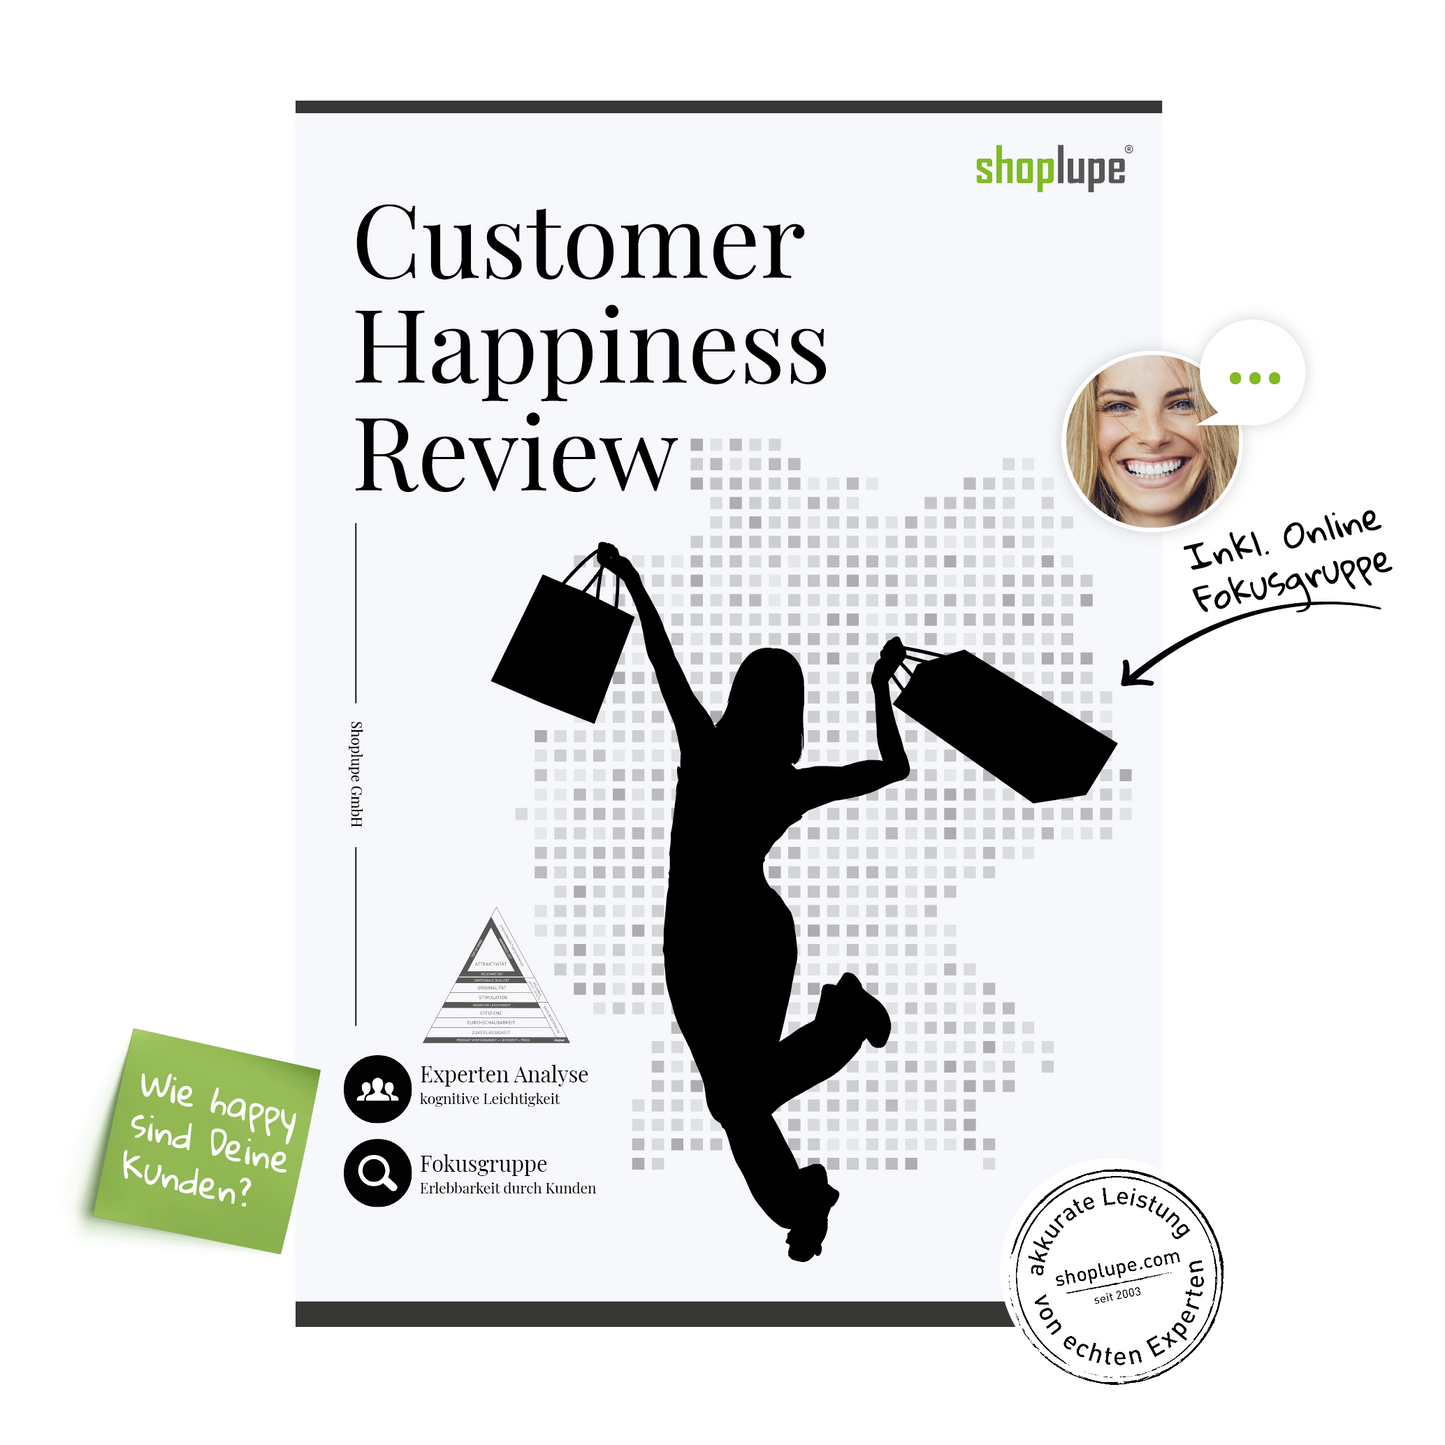 Customer Happiness Review